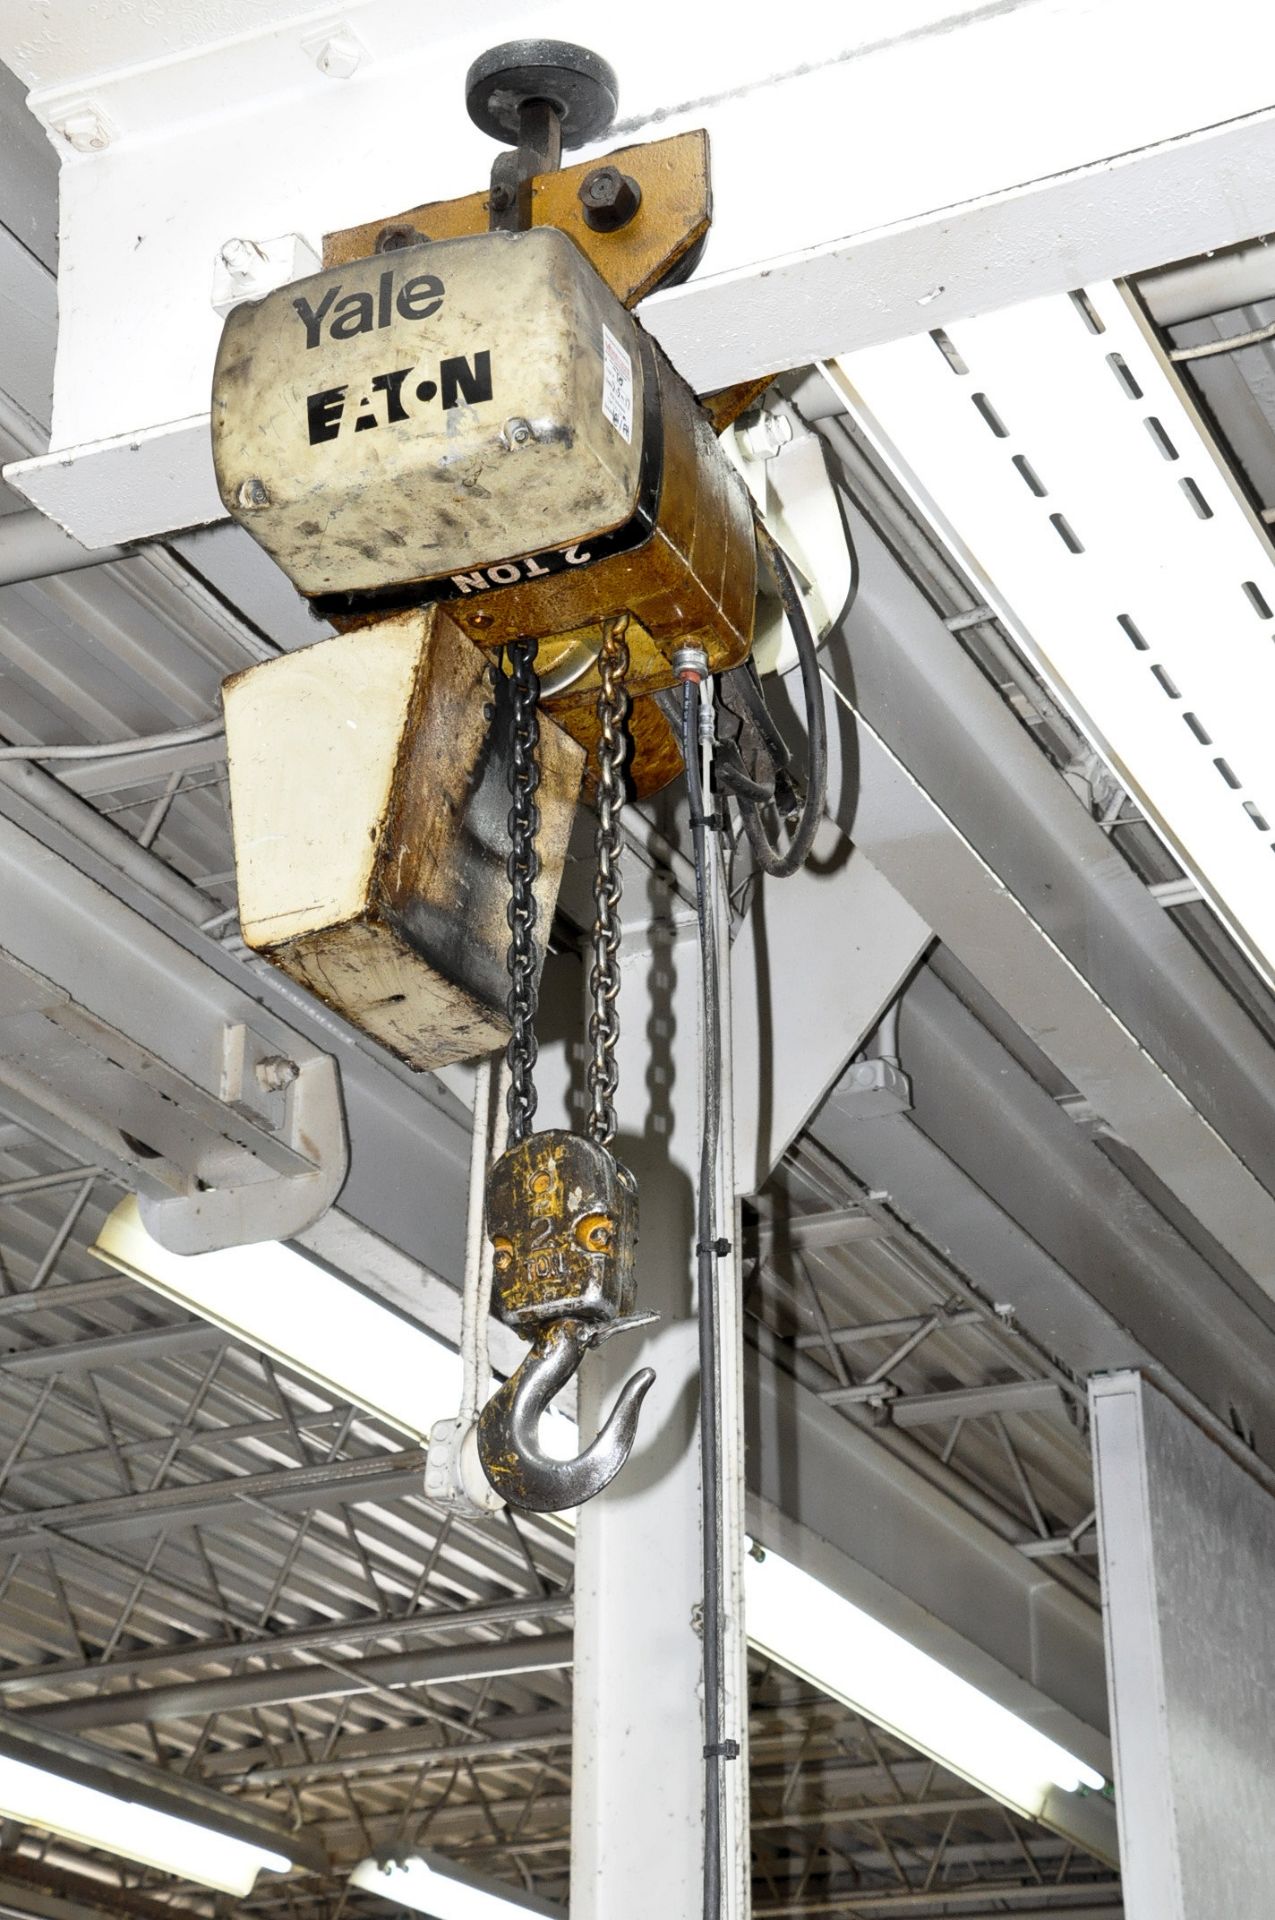 Eaton 2-Ton Capacity Pendant Controlled Electric Hoist with Trolley, (Beam Not Included) - Image 2 of 2